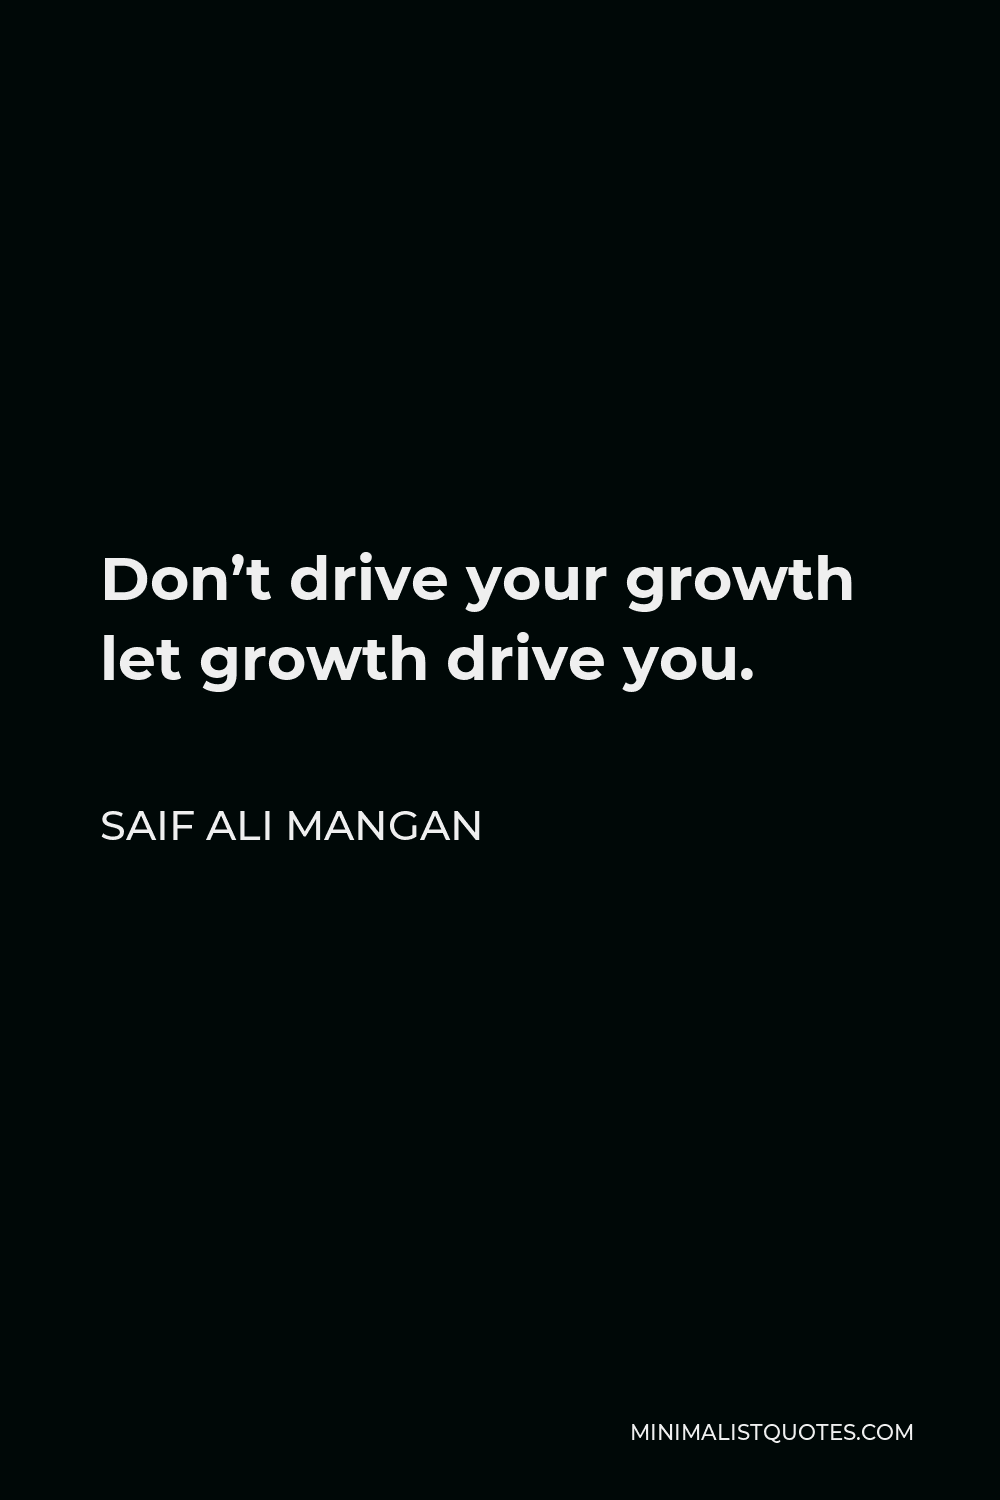 Saif Ali Mangan Quote - Don’t drive your growth let growth drive you.